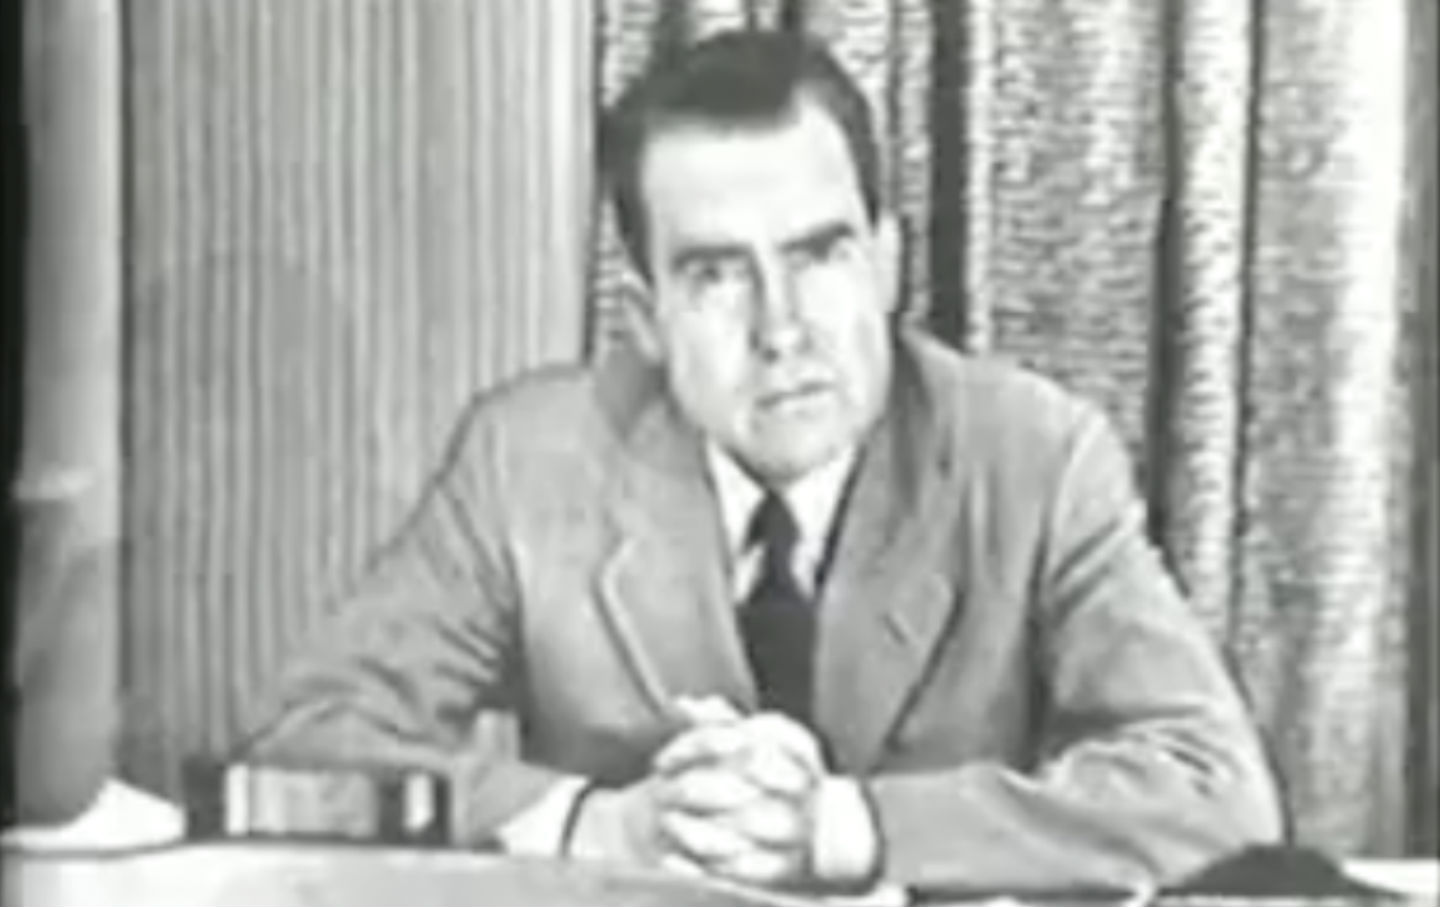 September 23, 1952: Richard Nixon Makes the ‘Checkers’ Speech to Save His Vice-Presidential Candidacy